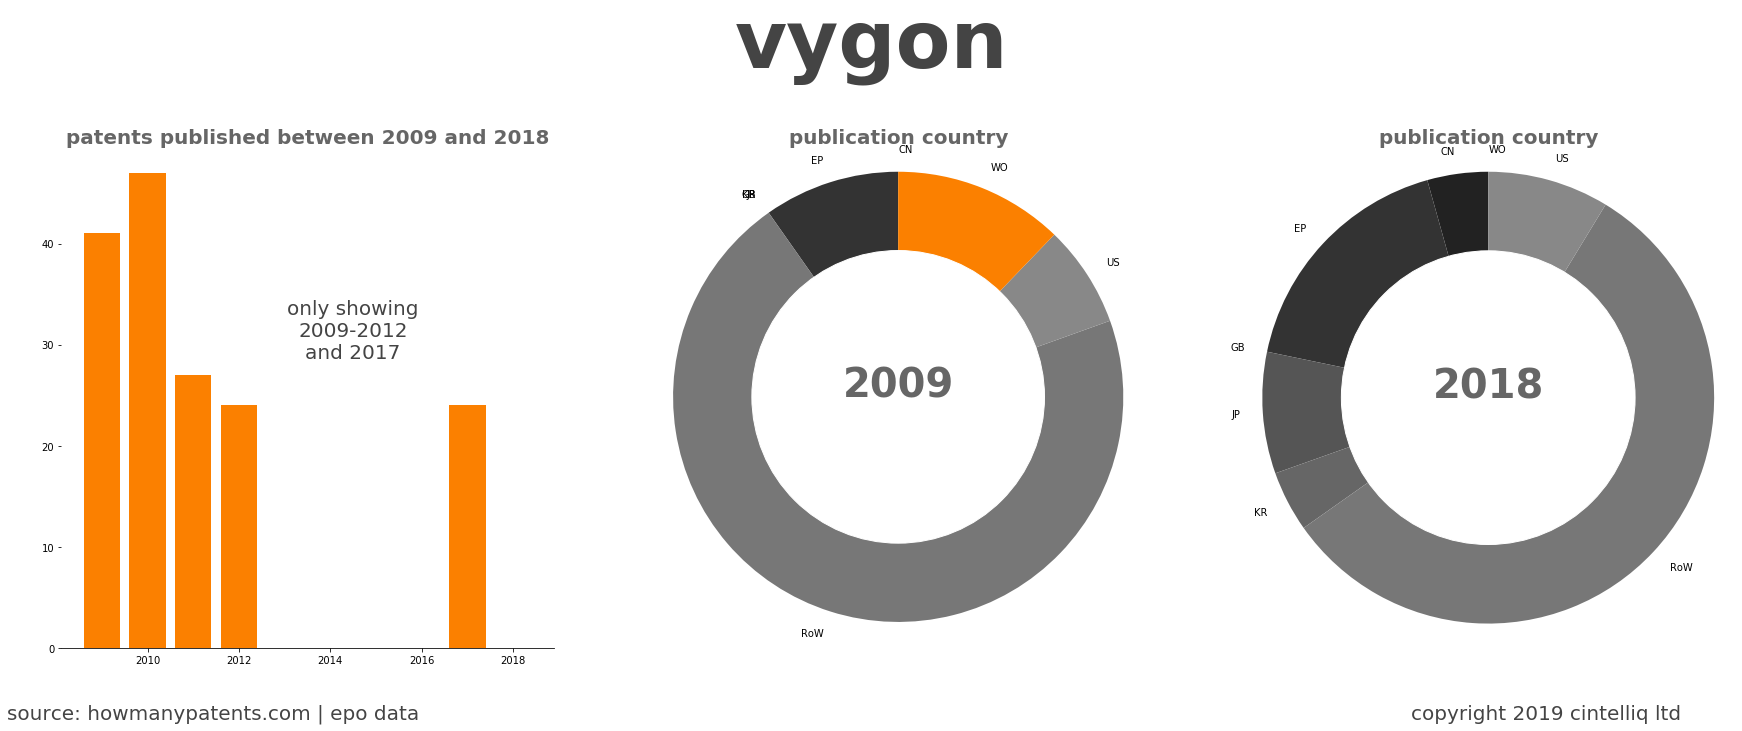 summary of patents for Vygon